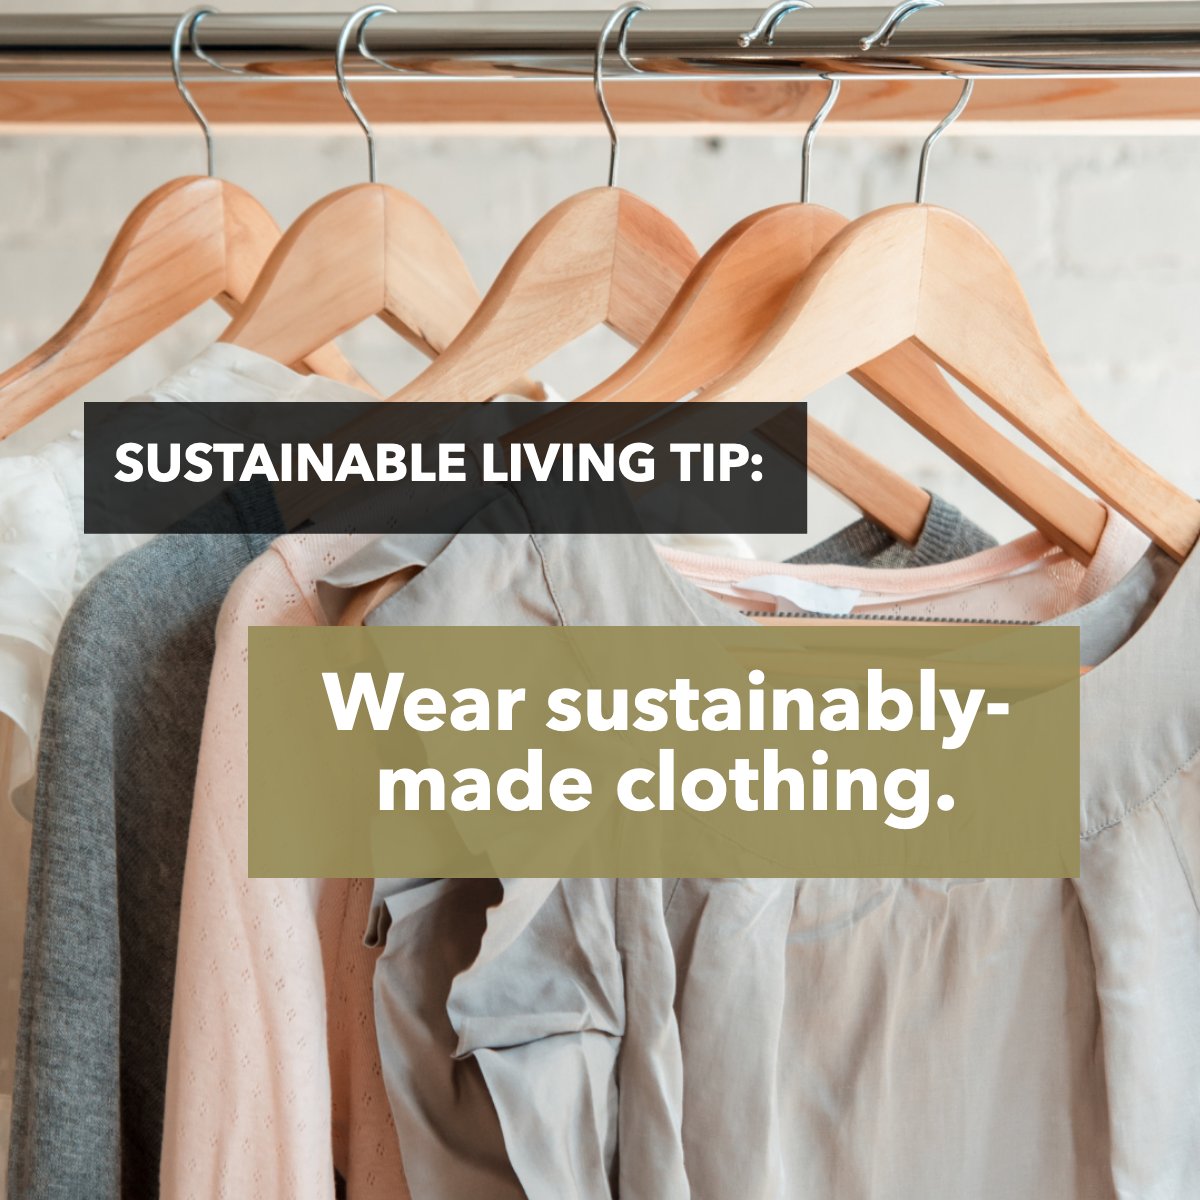 💚 Sustainable fashion 👕 is a design philosophy and movement that promotes environmental and social responsibility! 🌳

Are you part of this movement yet? 💪

#sustainable #fashion #clothes #thinkgreen
 #homesalesforce #livinginwoodstockga #johnbthomasjr